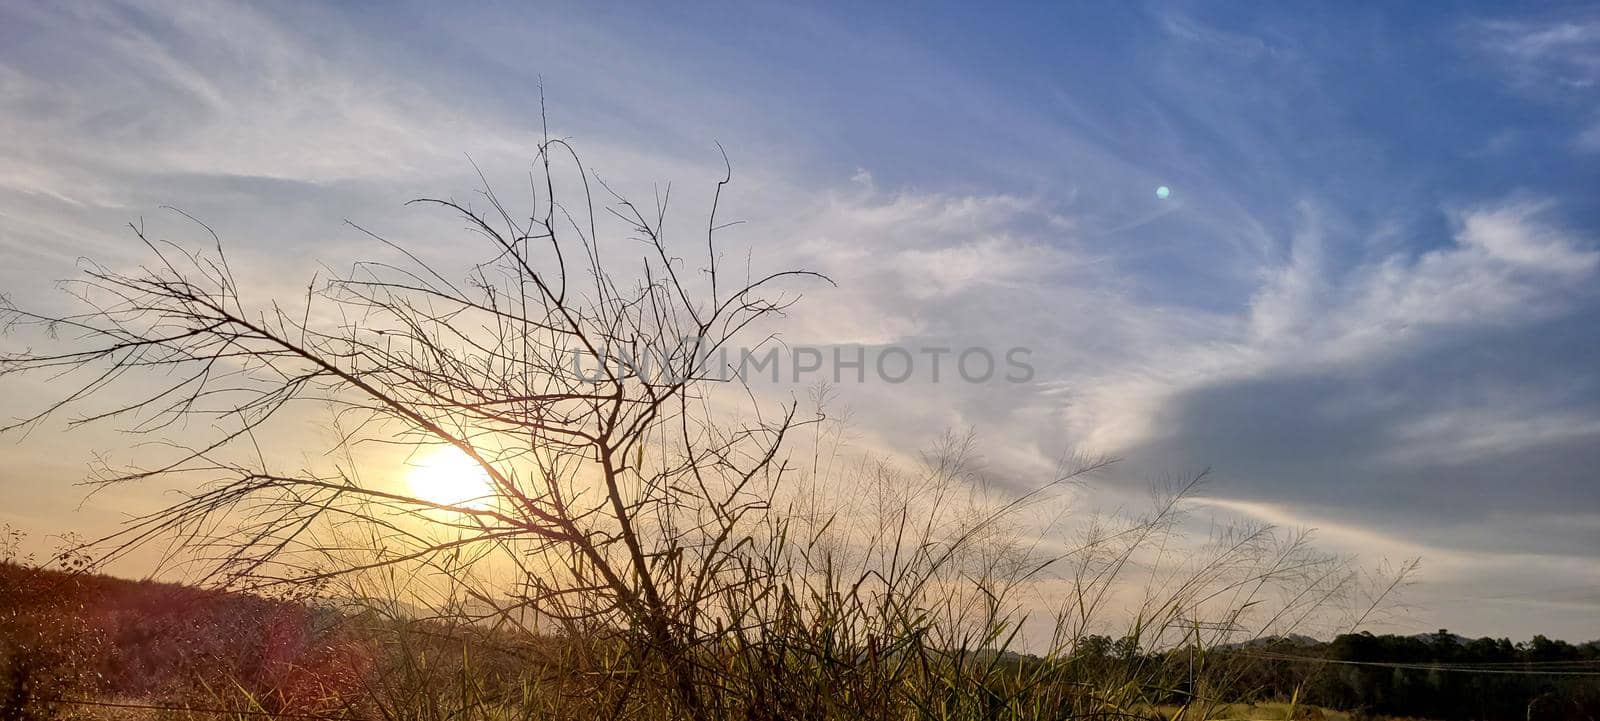 eucalyptus harvest on farm in the countryside of Brazil with sunny sky with wonderful view